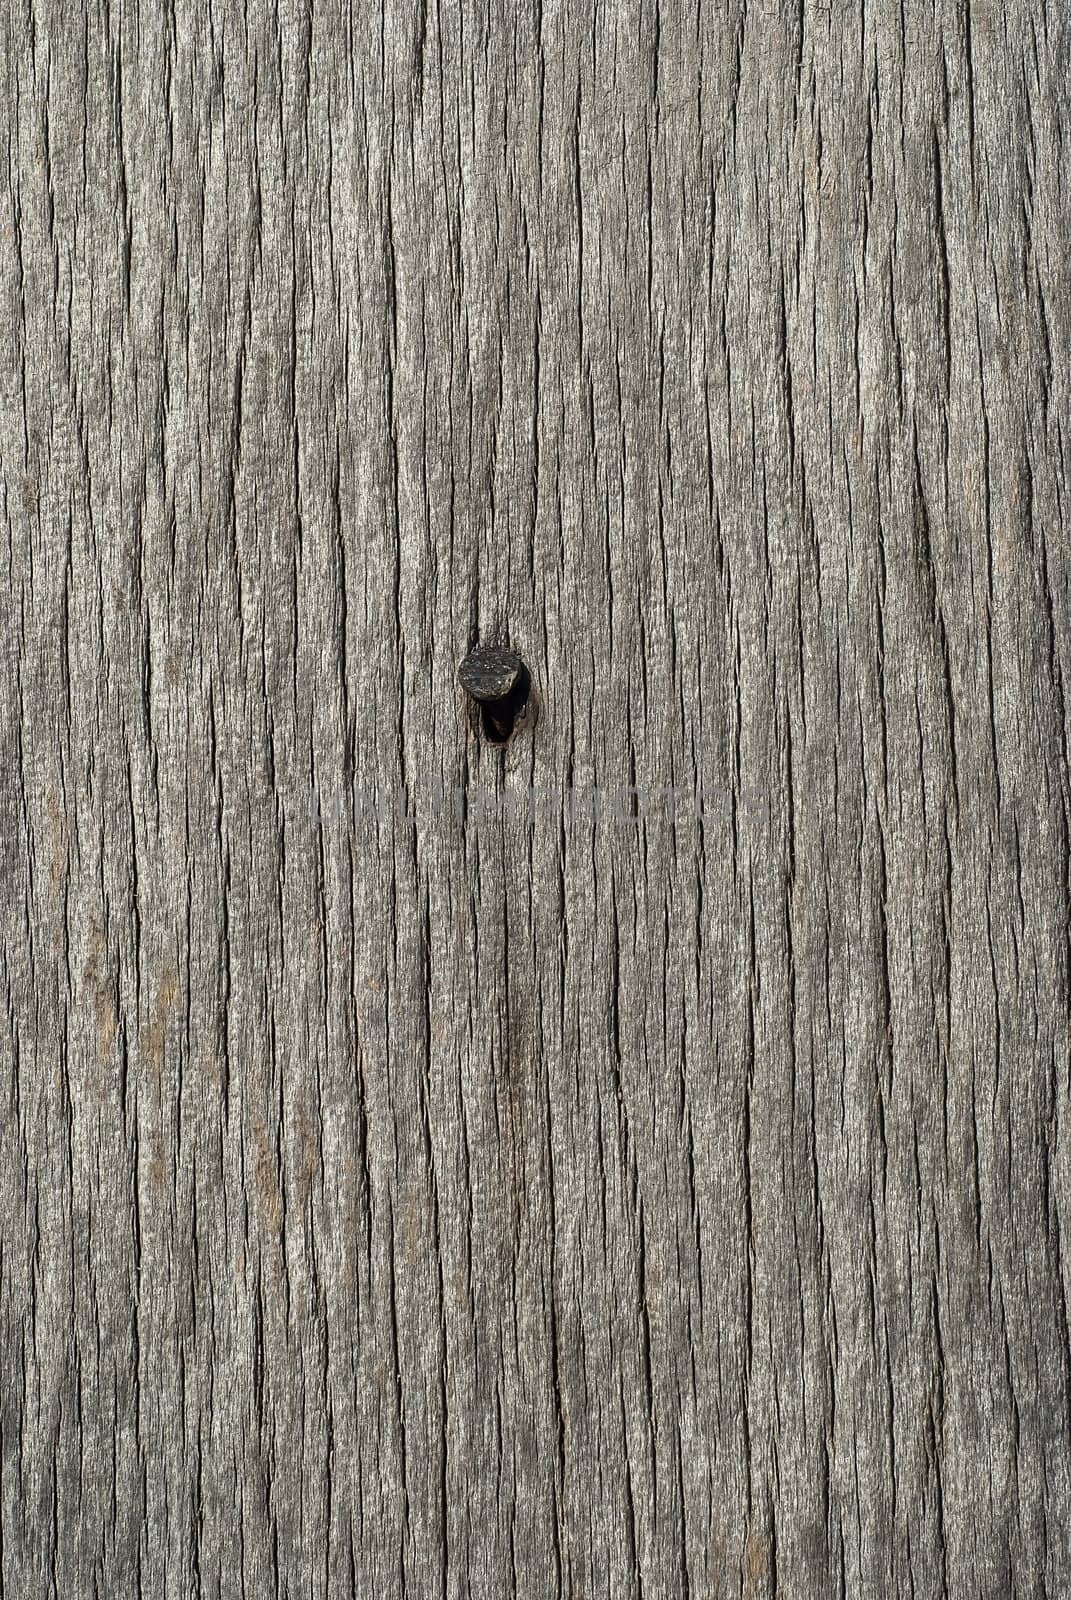 Old weathered wooden board nail by varbenov